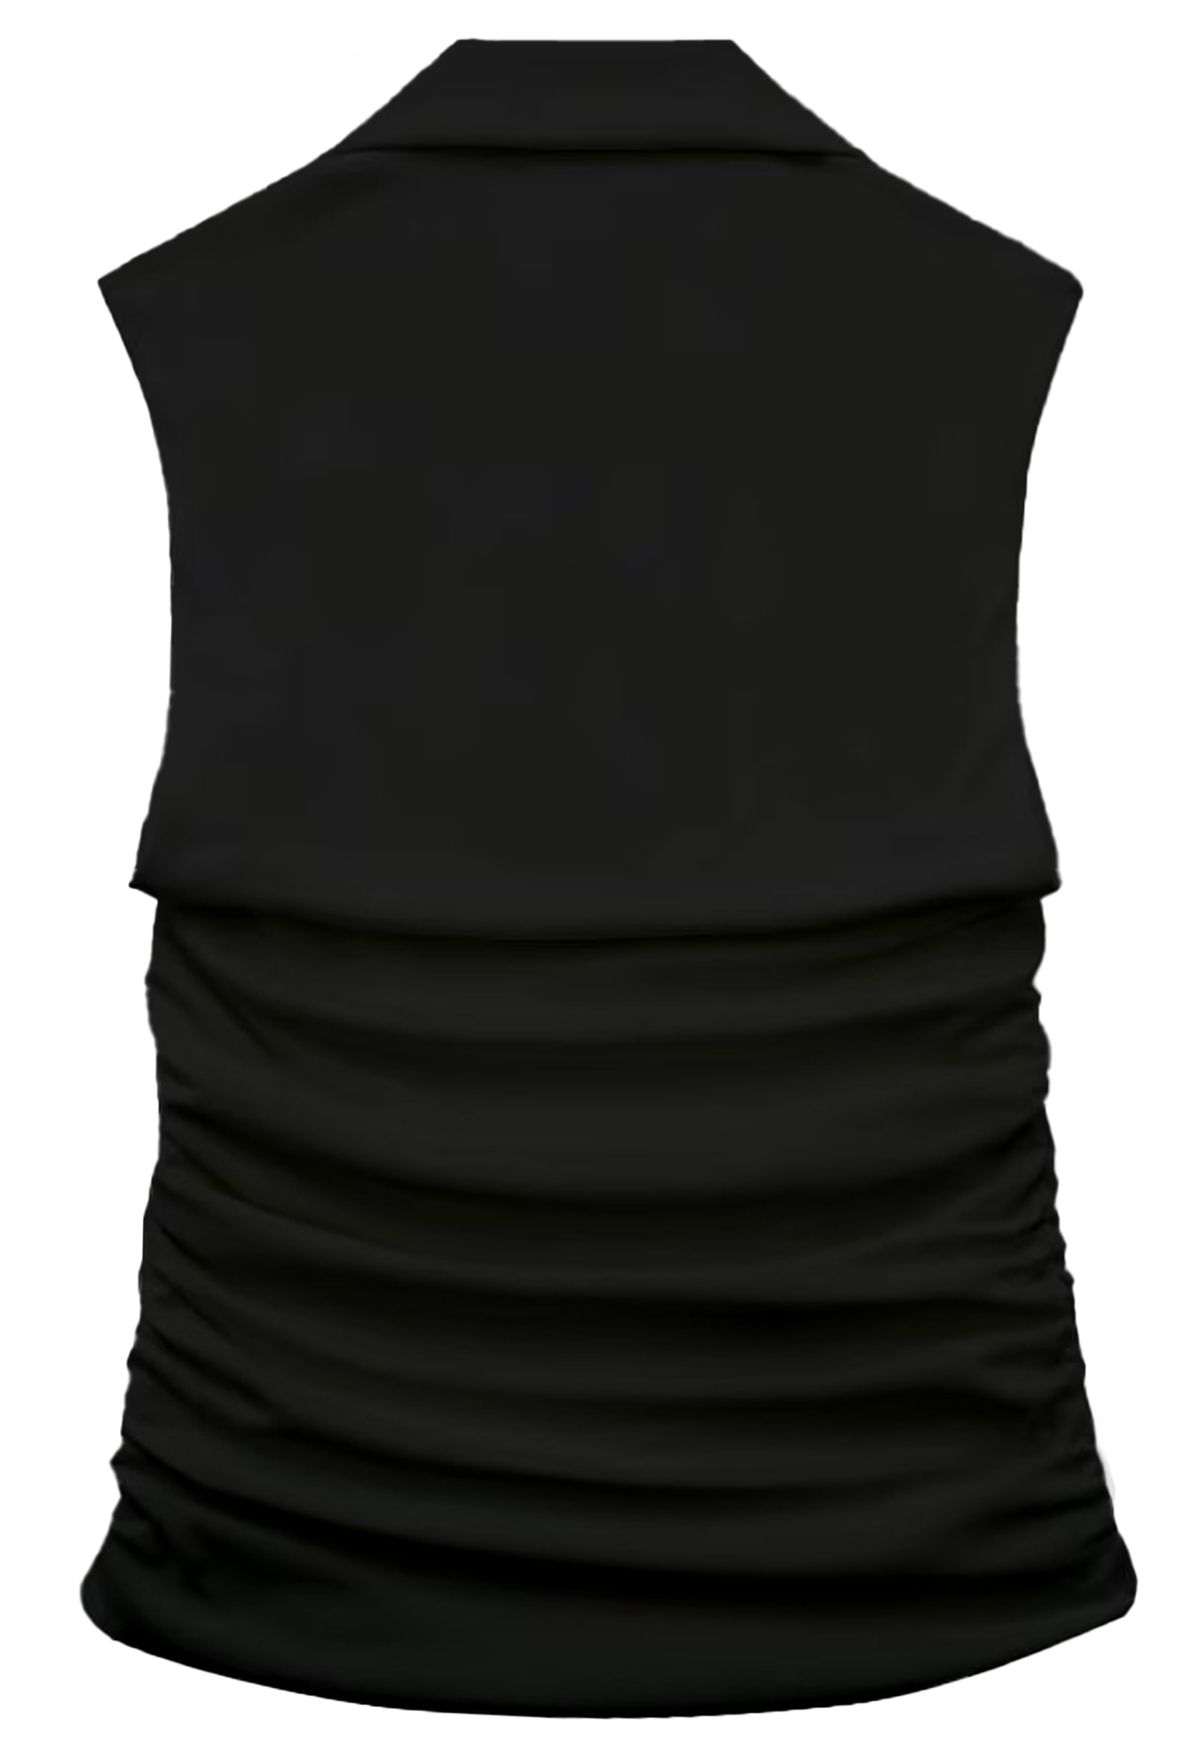 Square Neck Ruched Waist Sleeveless Top in Black